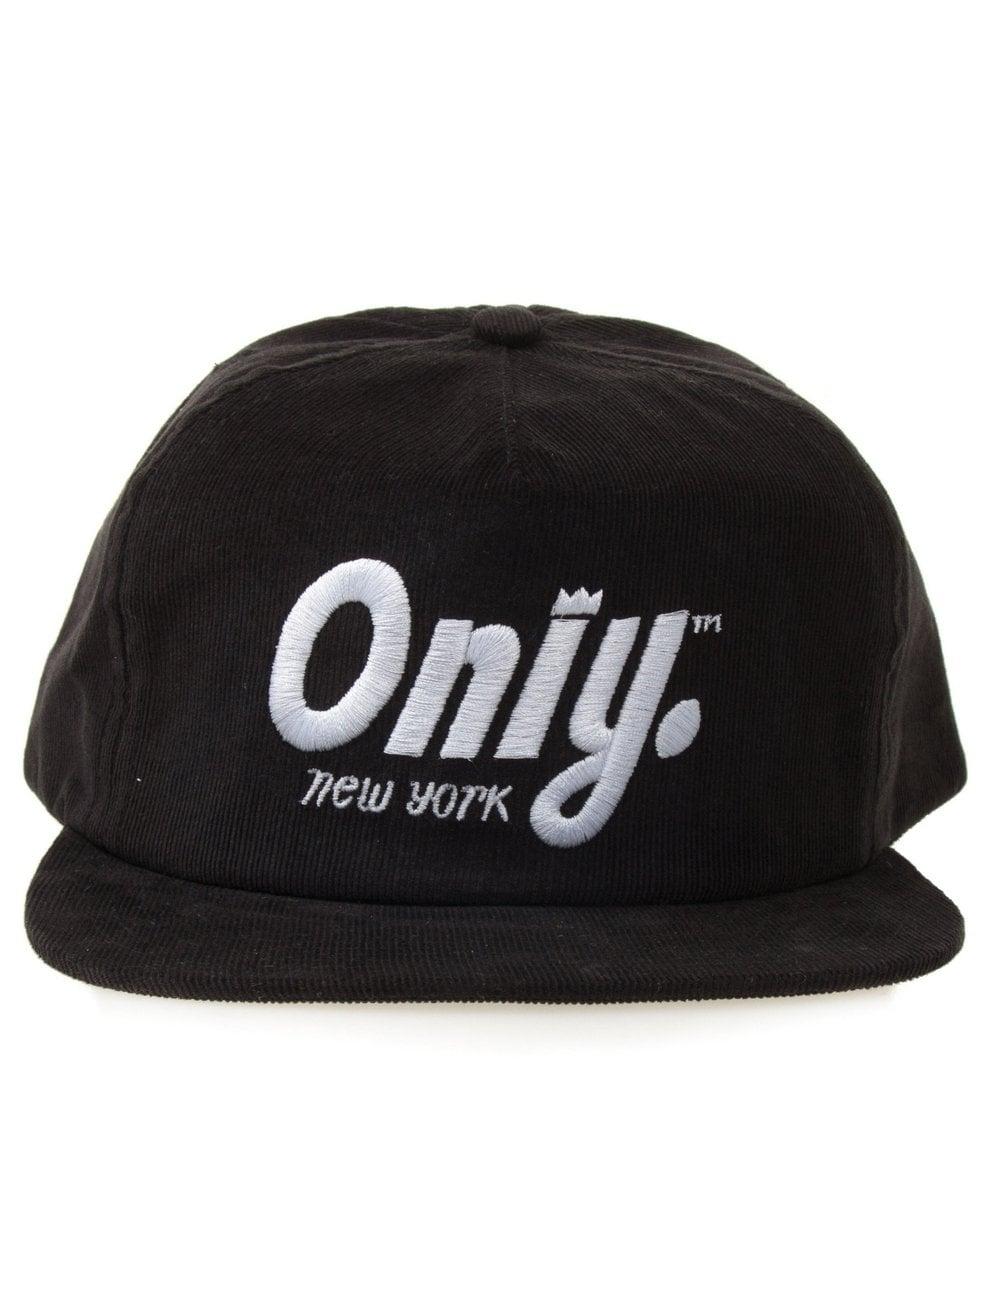 New York Crown Logo - Only NY Clothing Crown Logo Snapback from Fat